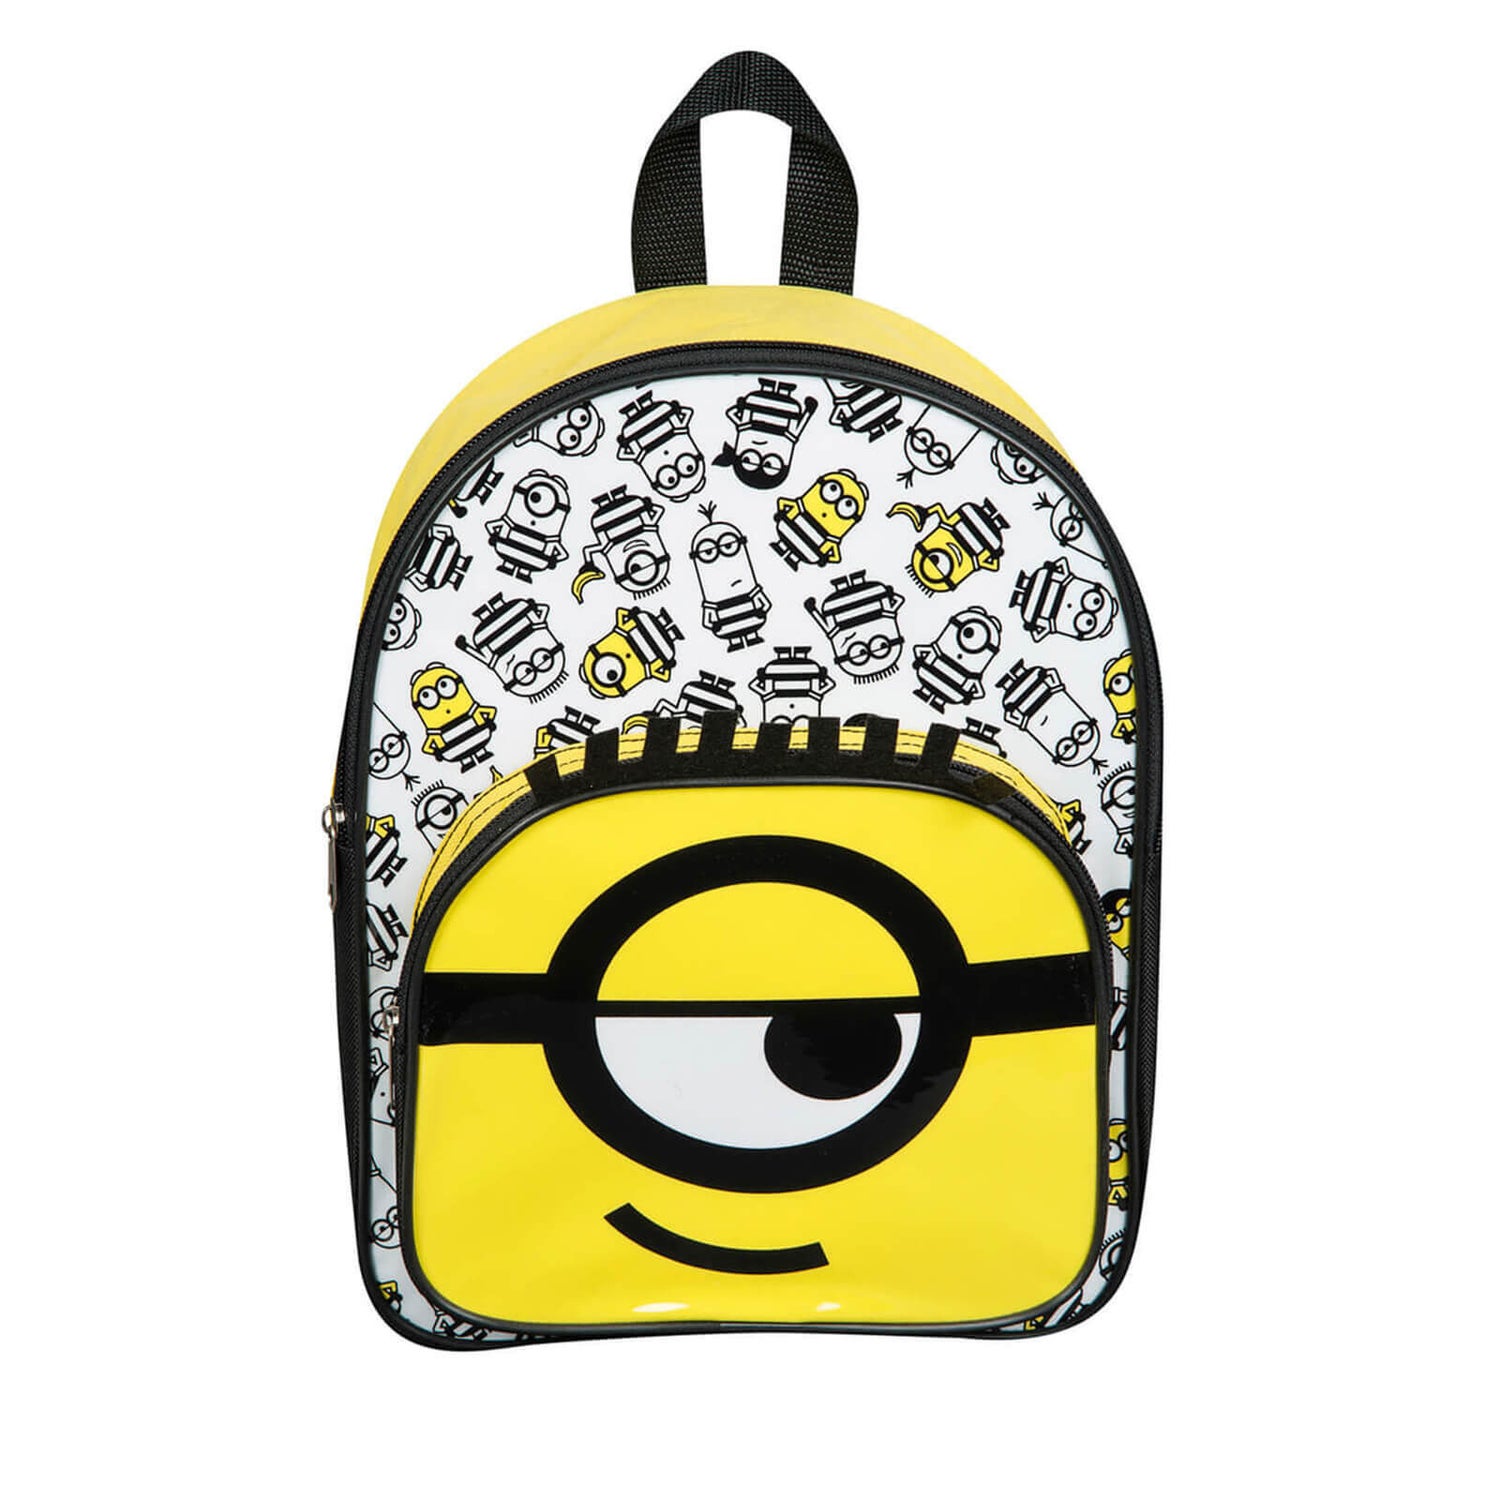 Despicable Me 3 Minions Backpack - Yellow Merchandise - Zavvi US